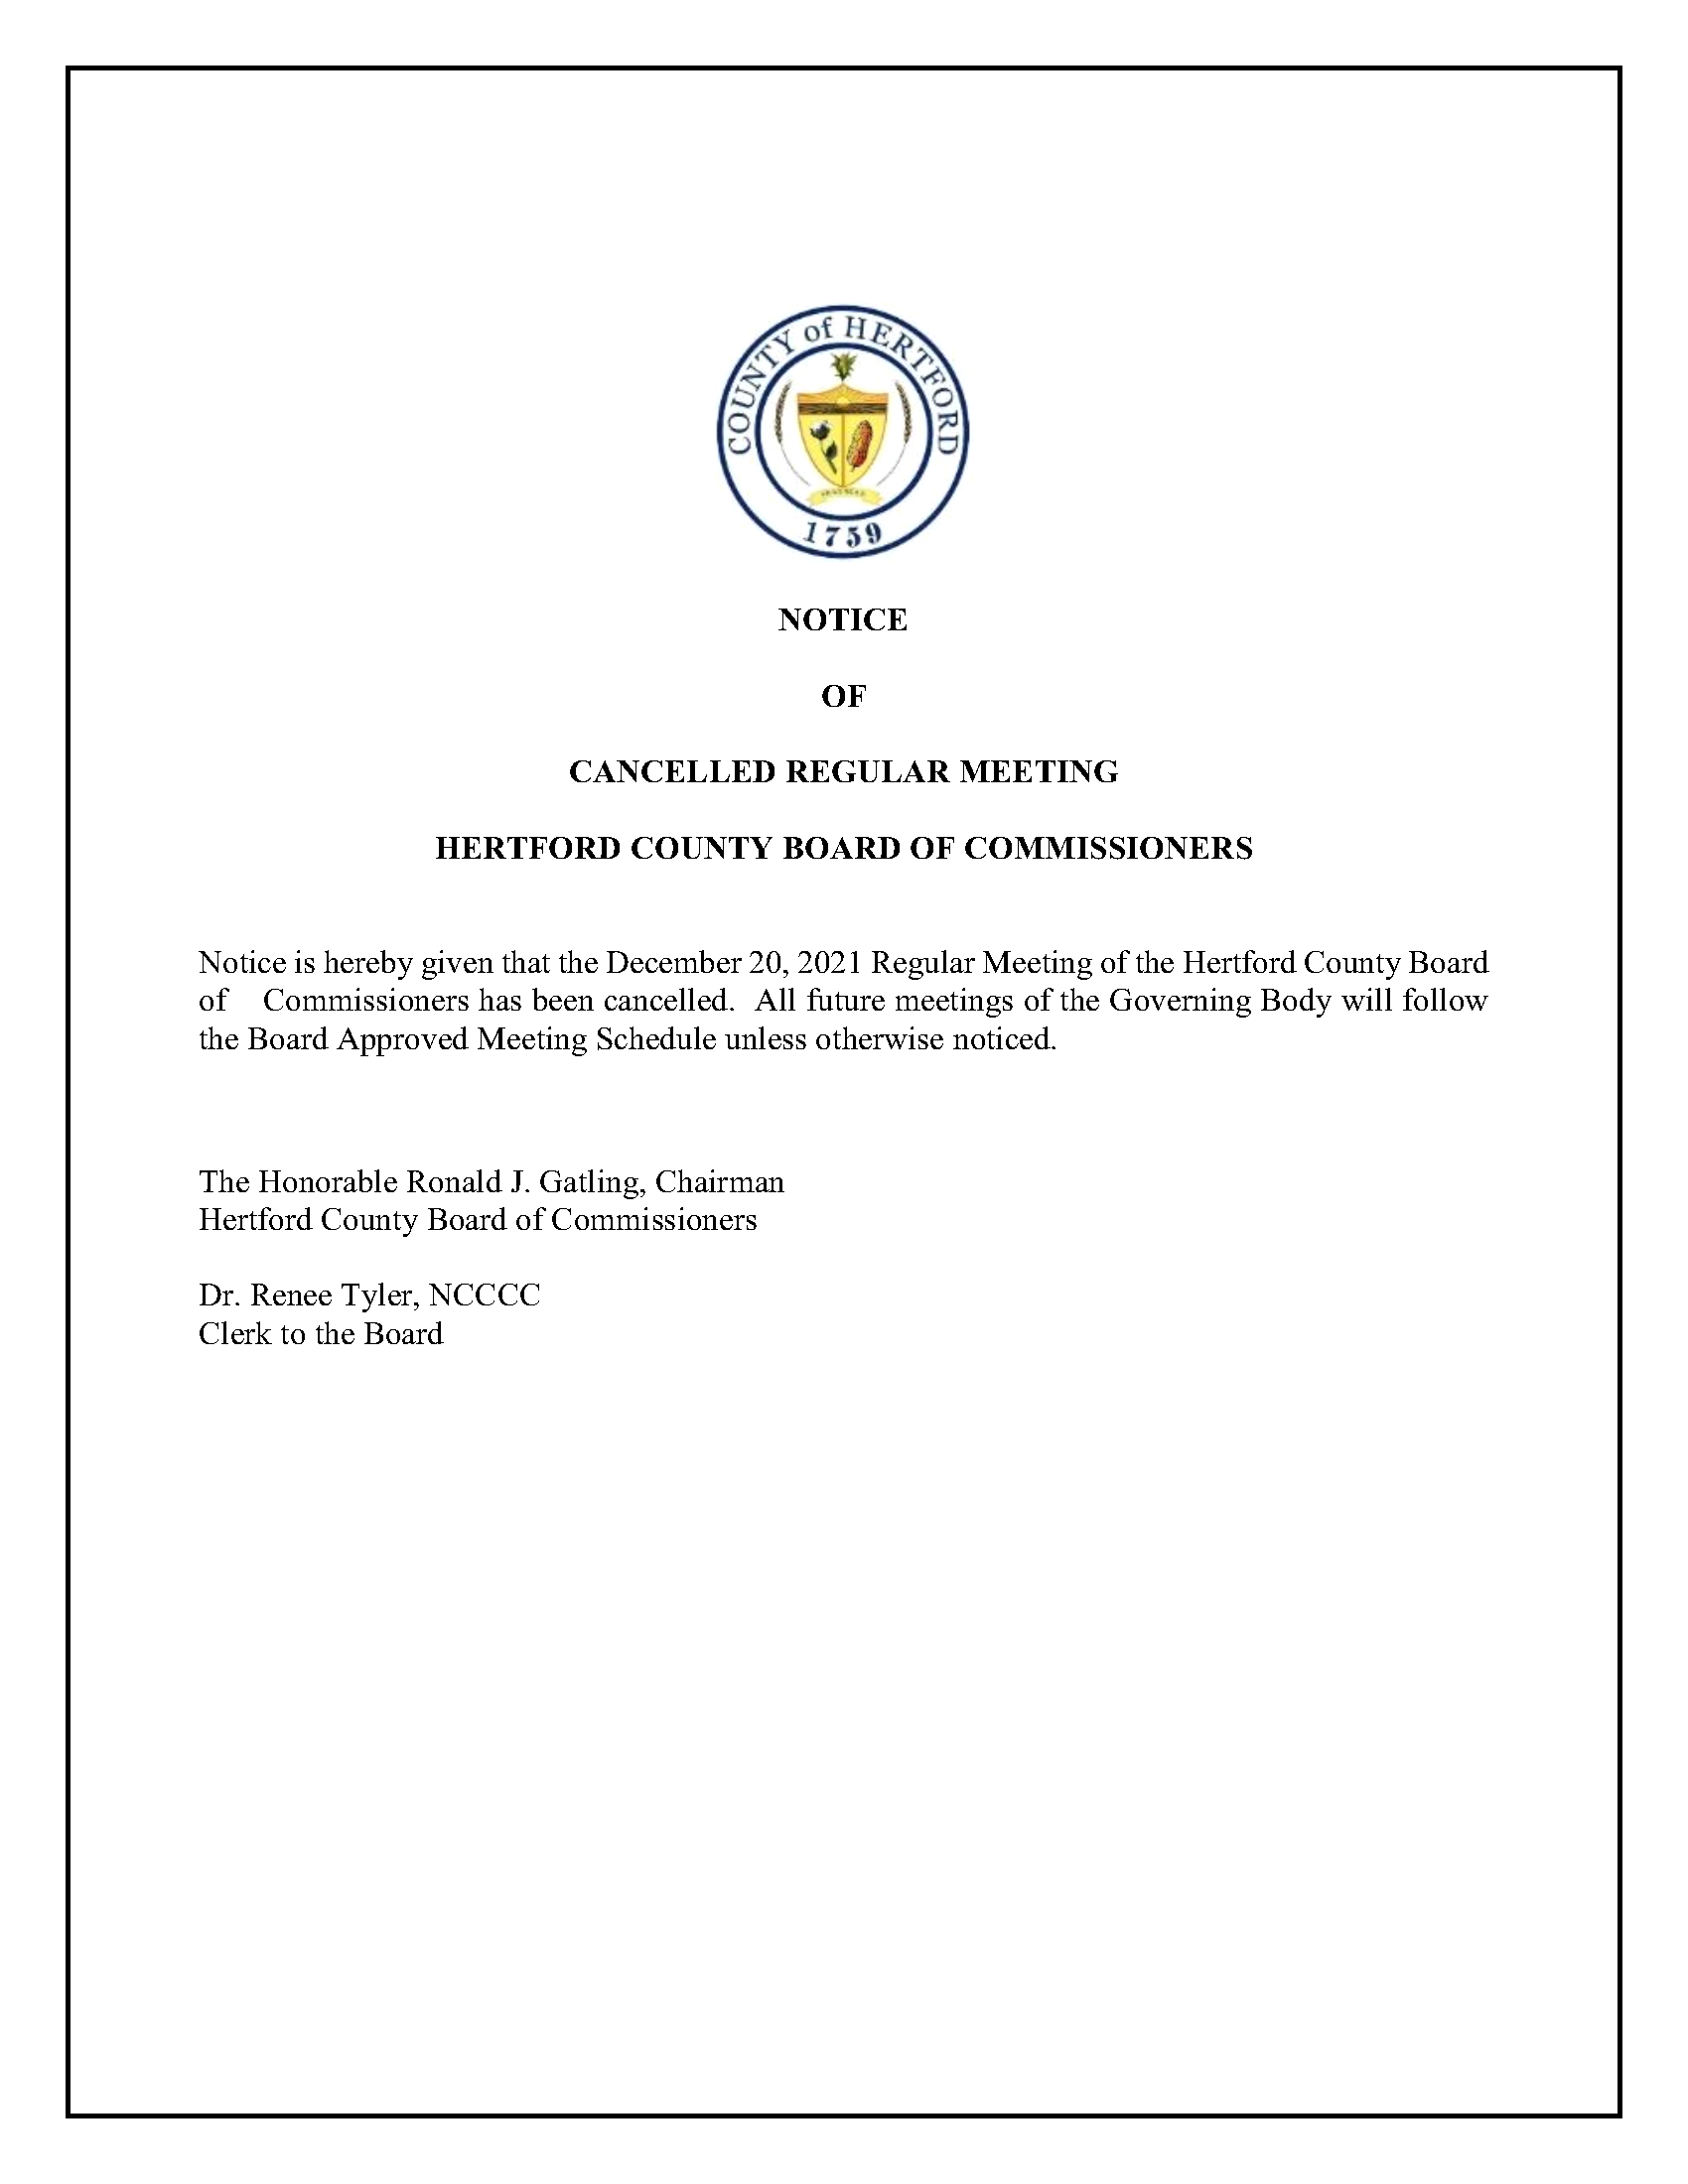 NOTICE of Cancelled Meeting _12202021